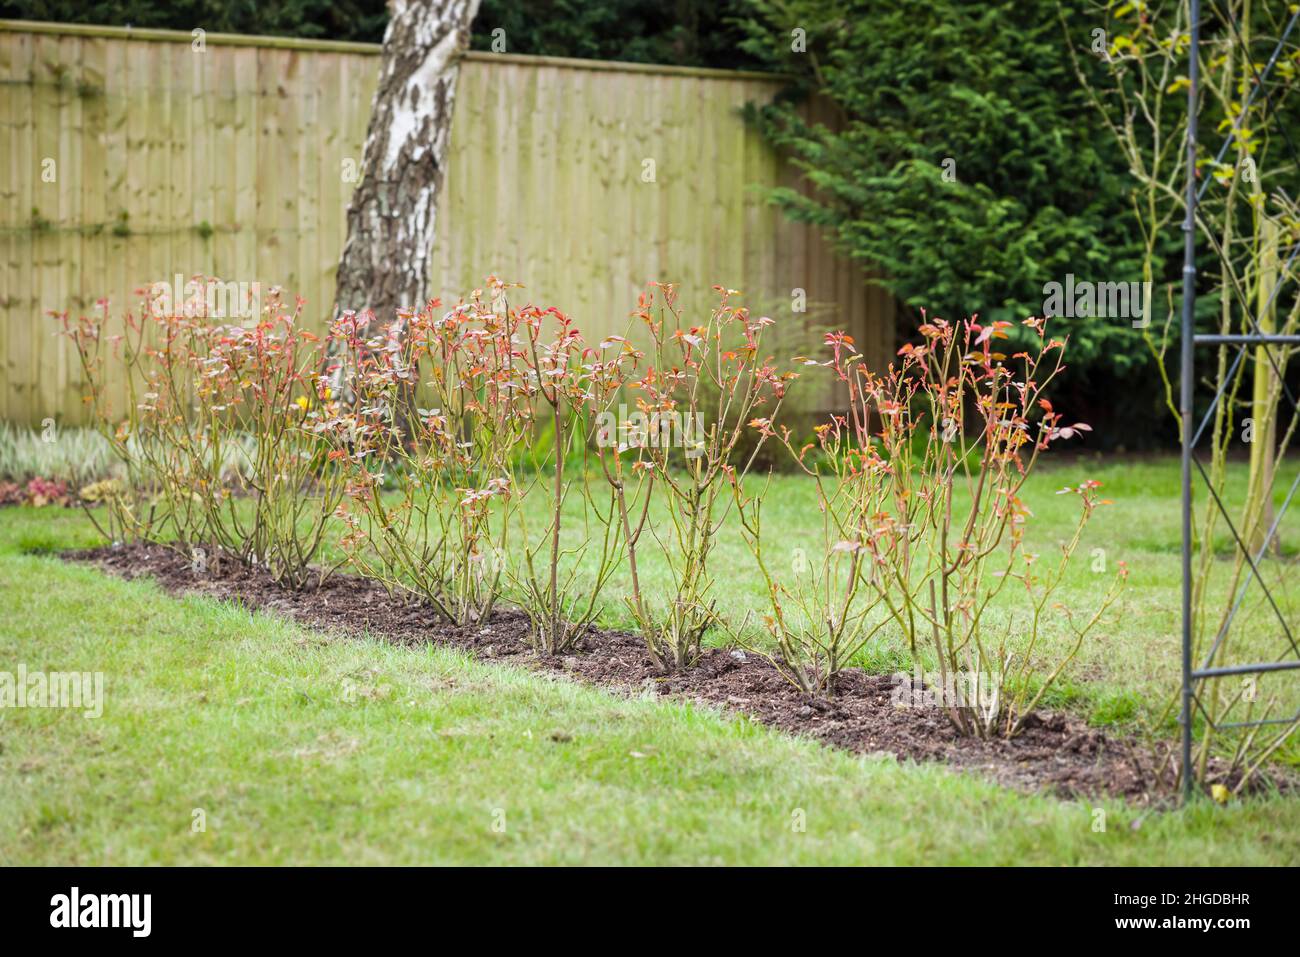 Rose hedge, row of shrub rose bushes in a UK garden in winter Stock Photo